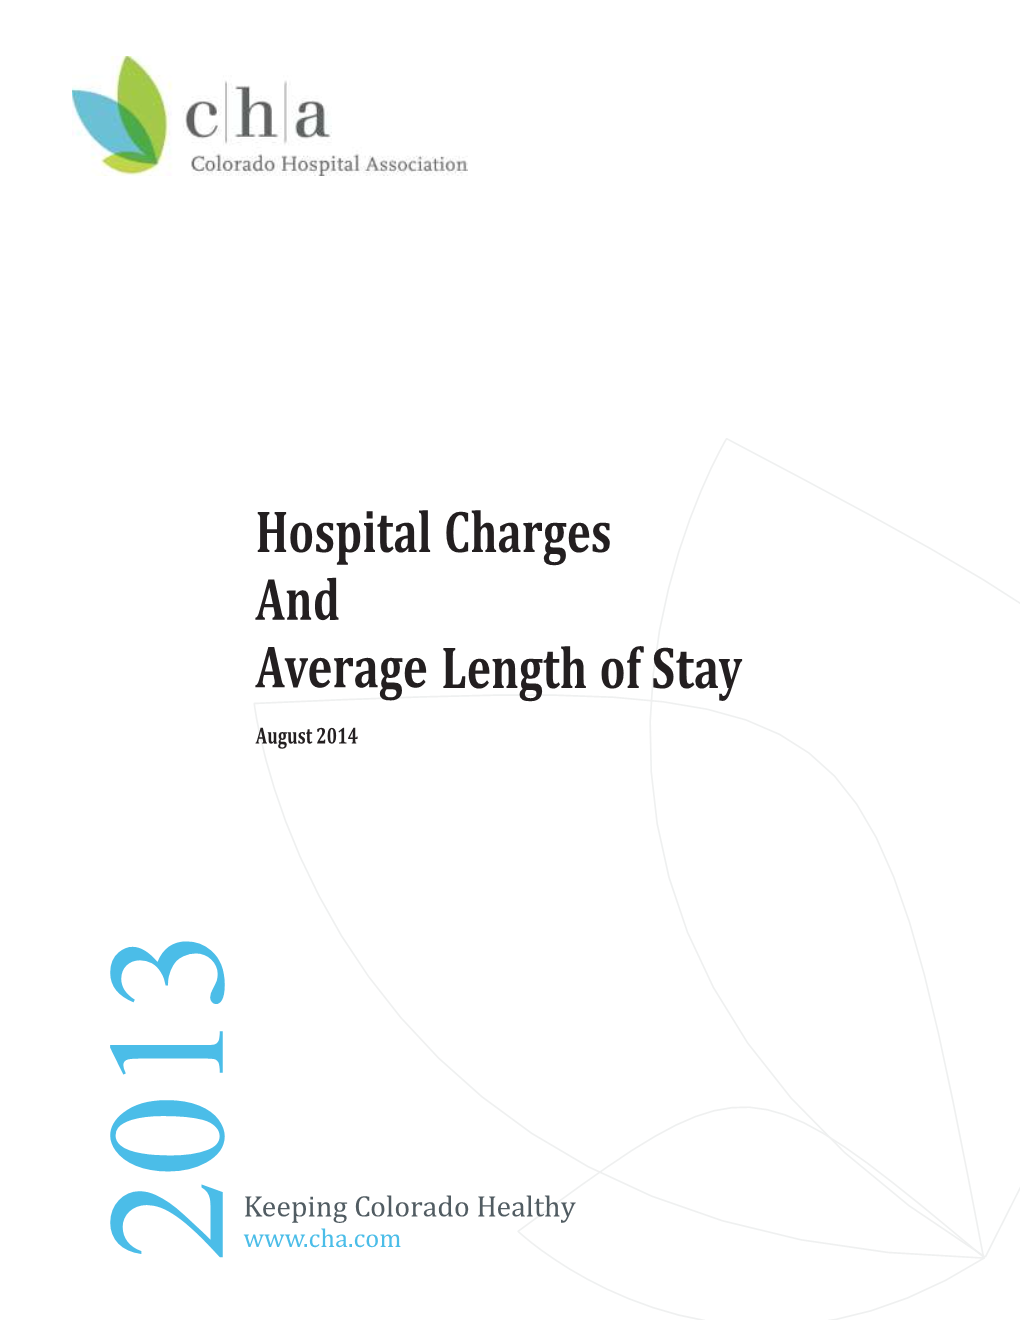 Hospital Charges and Average Length of Stay (2013)